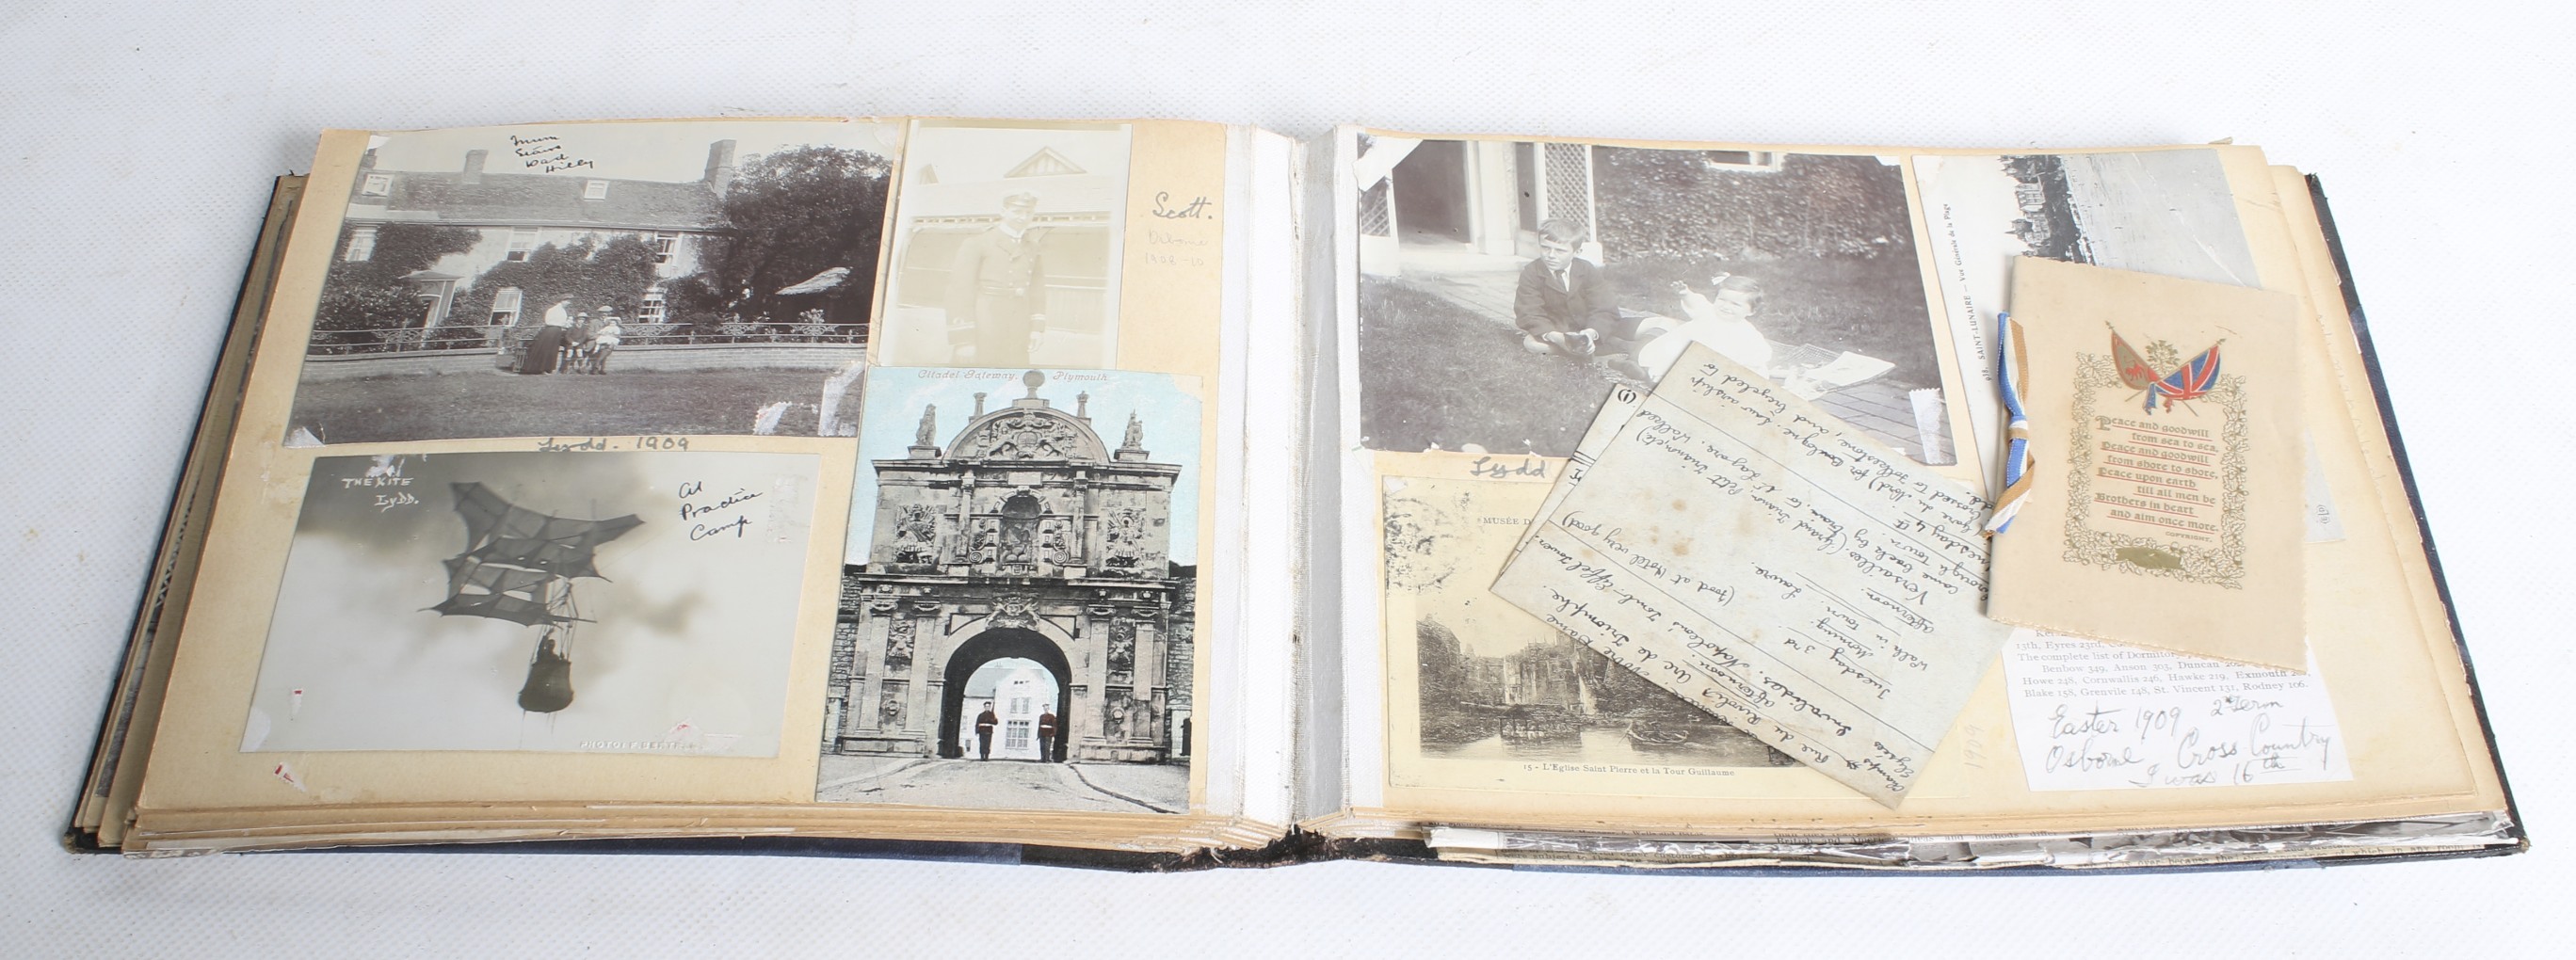 A circa 1900 album of photographs and ephemera, an autograph book and a certificate of thanks. - Image 5 of 6